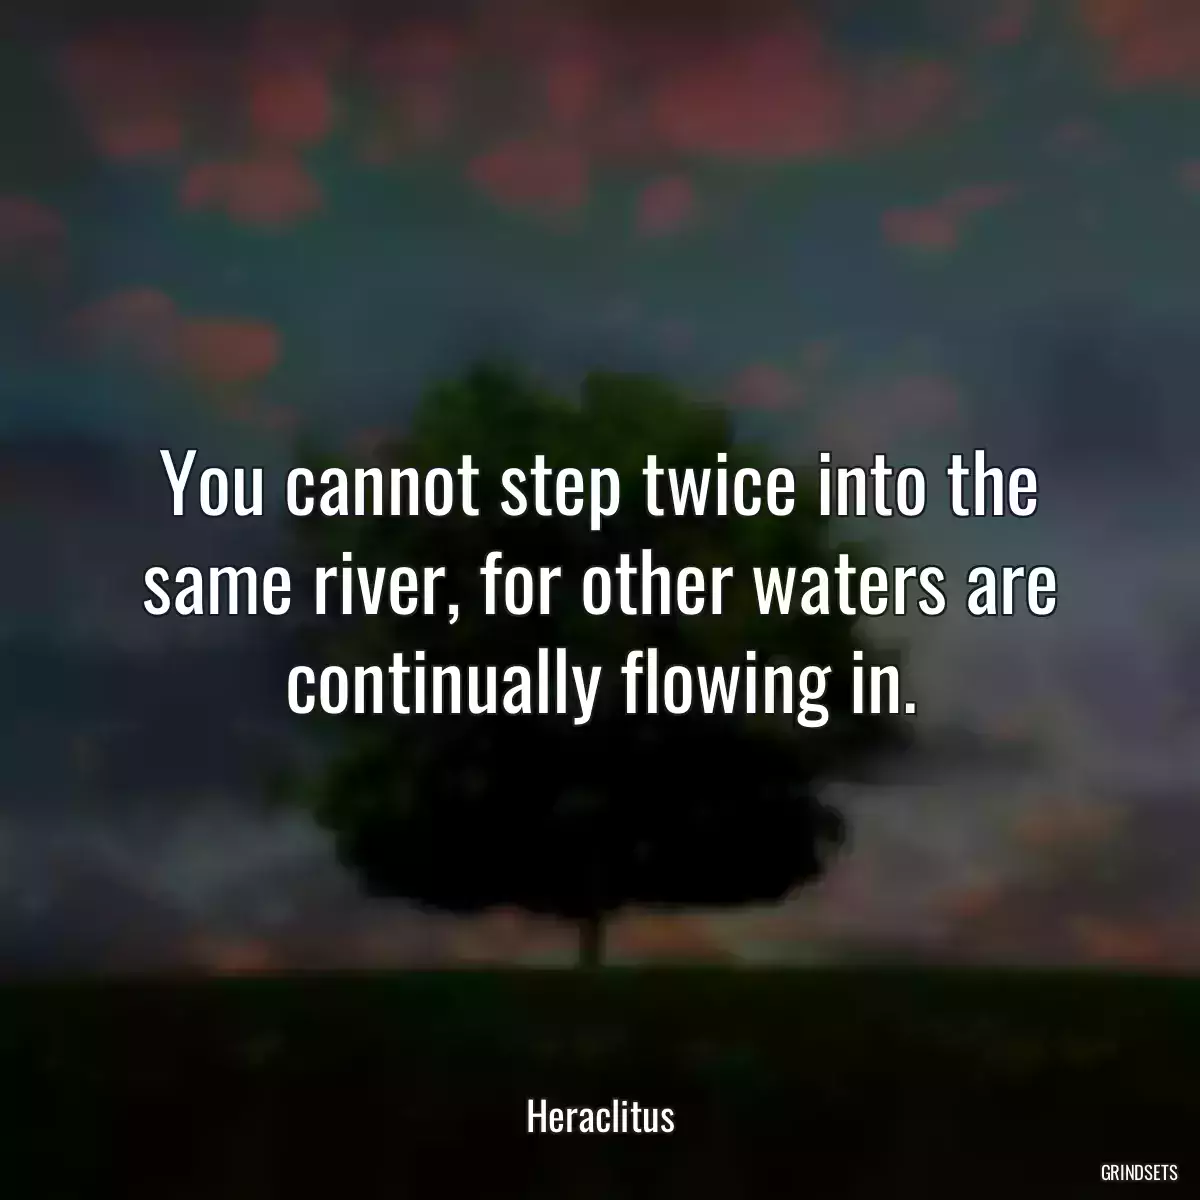 You cannot step twice into the same river, for other waters are continually flowing in.